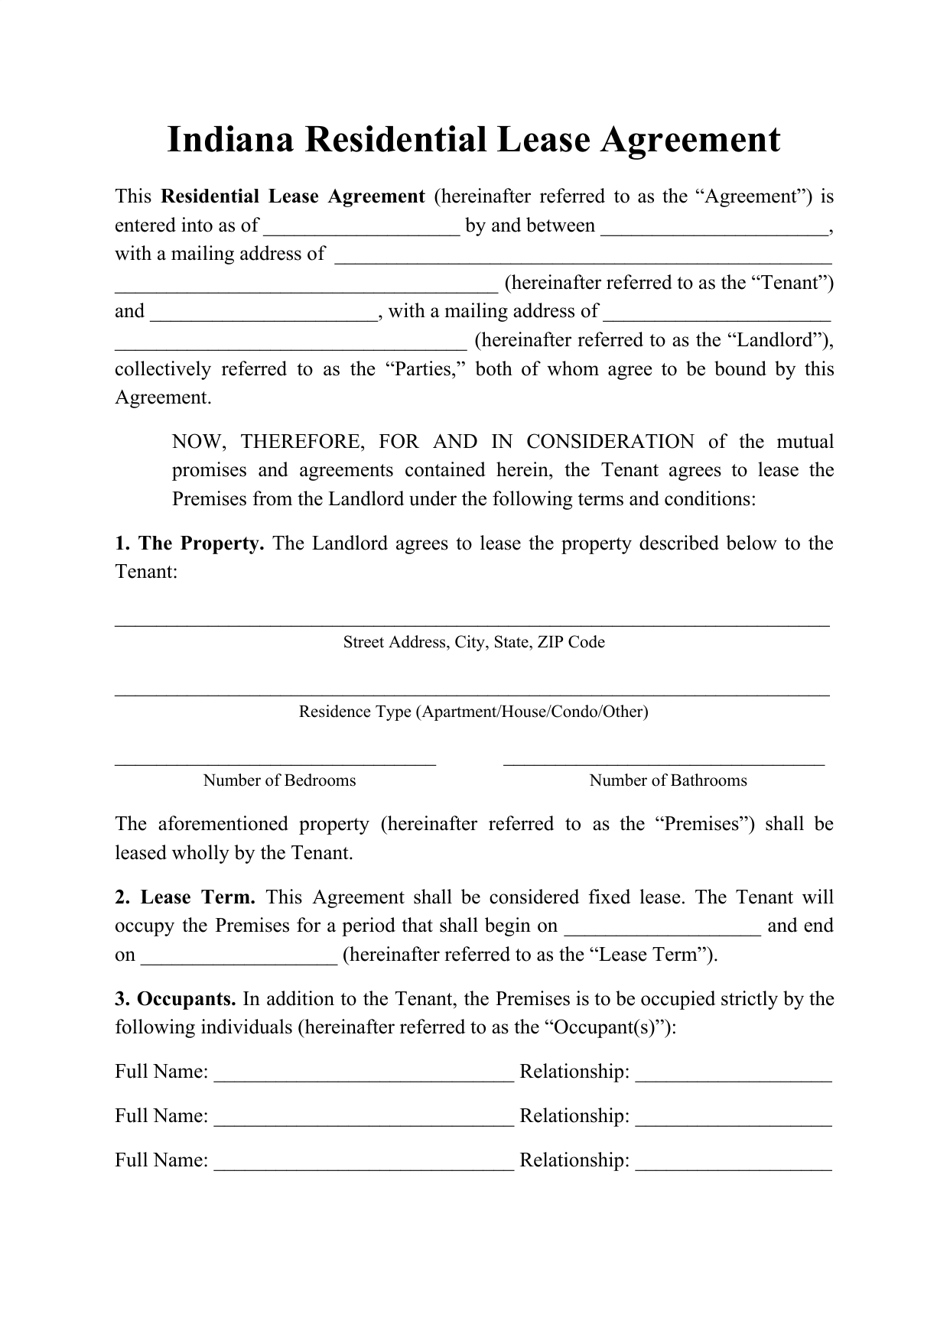 Indiana Residential Lease Agreement Template Fill Out Sign Online